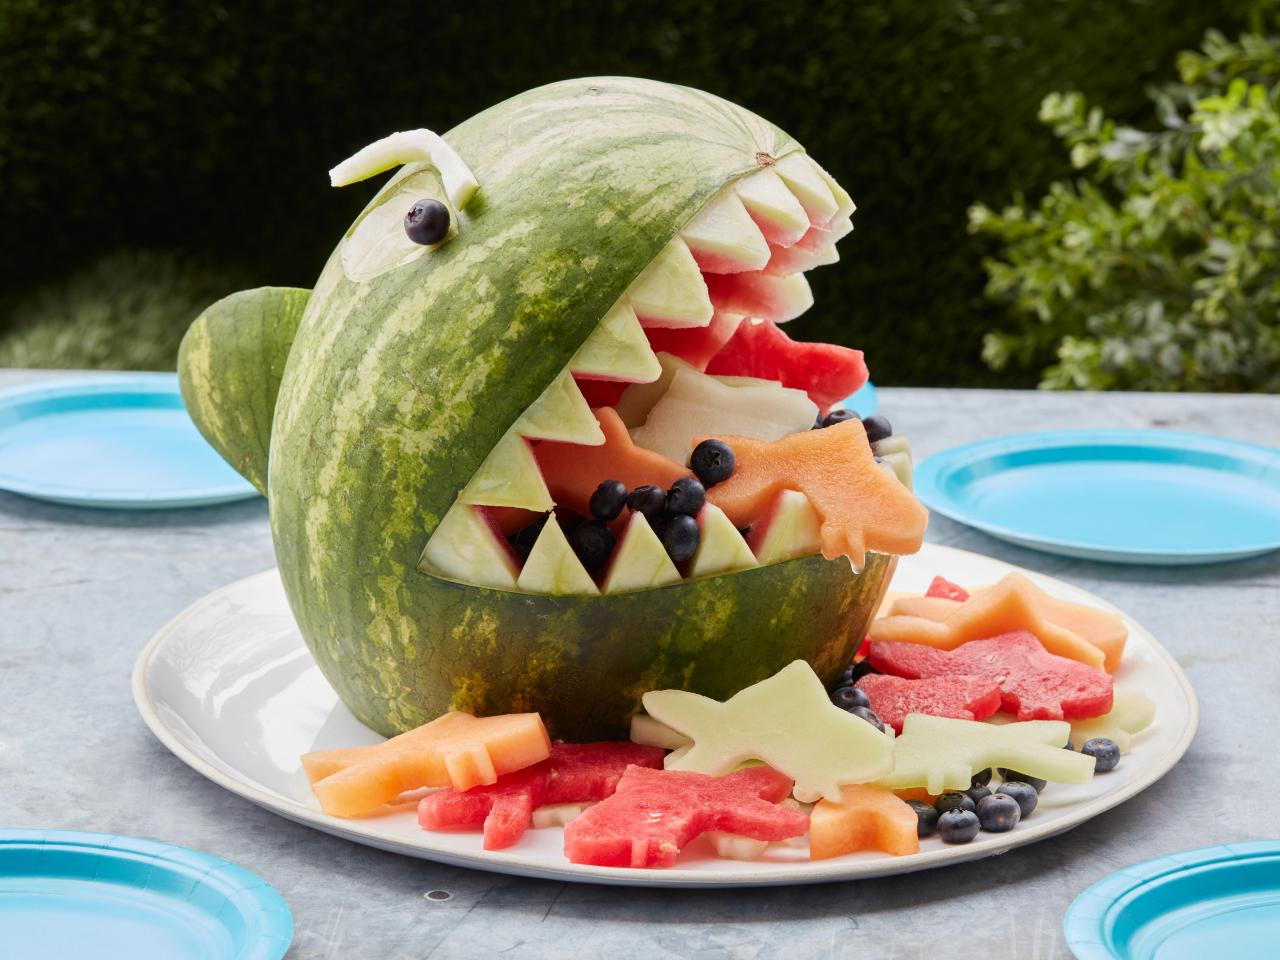 easy watermelon carving ideas